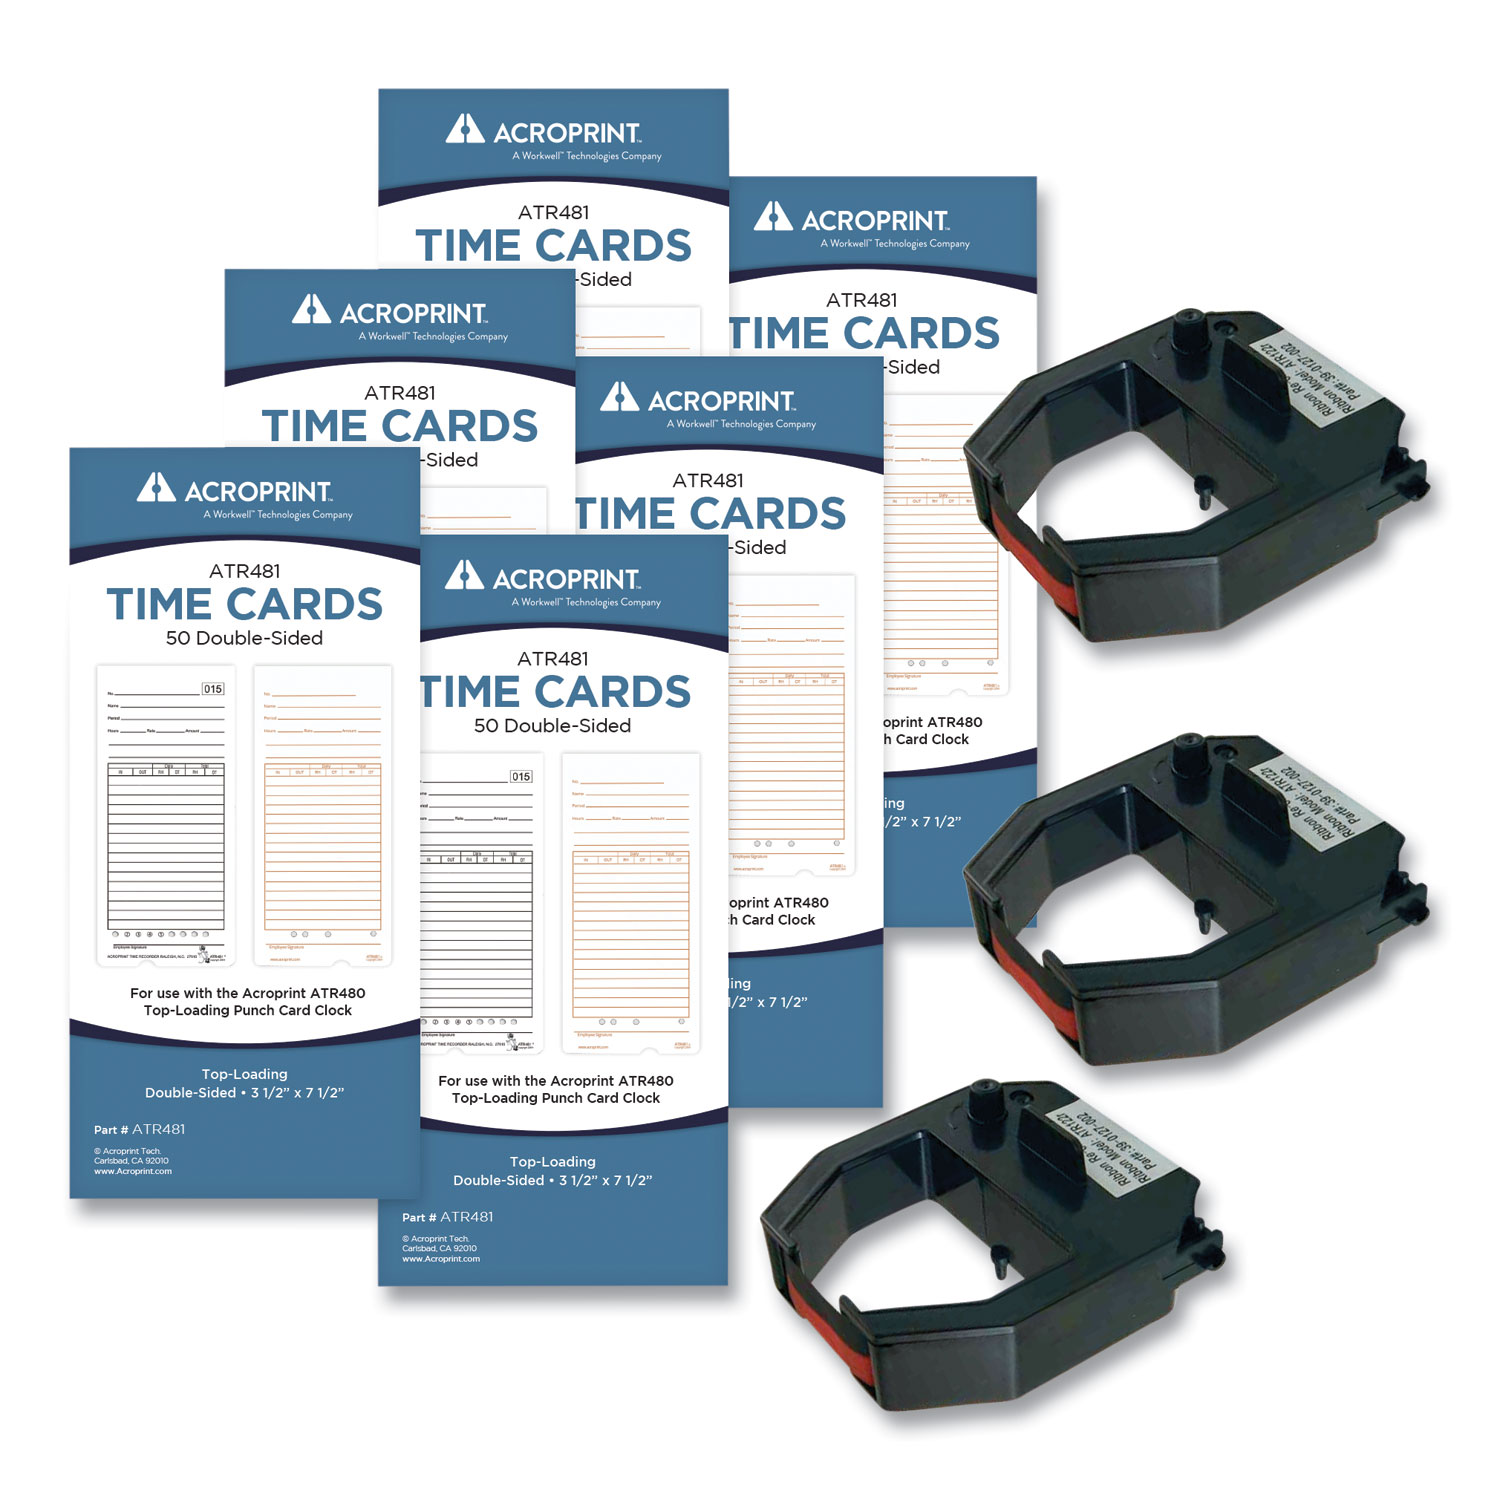  Acroprint 010296002 TXP300 Accessory Bundle, 3.5 x 7.5, Bi-Weekly/Weekly, Two-Sided, 300 Cards and 3 Ribbons/Kit (ACPTXP300) 